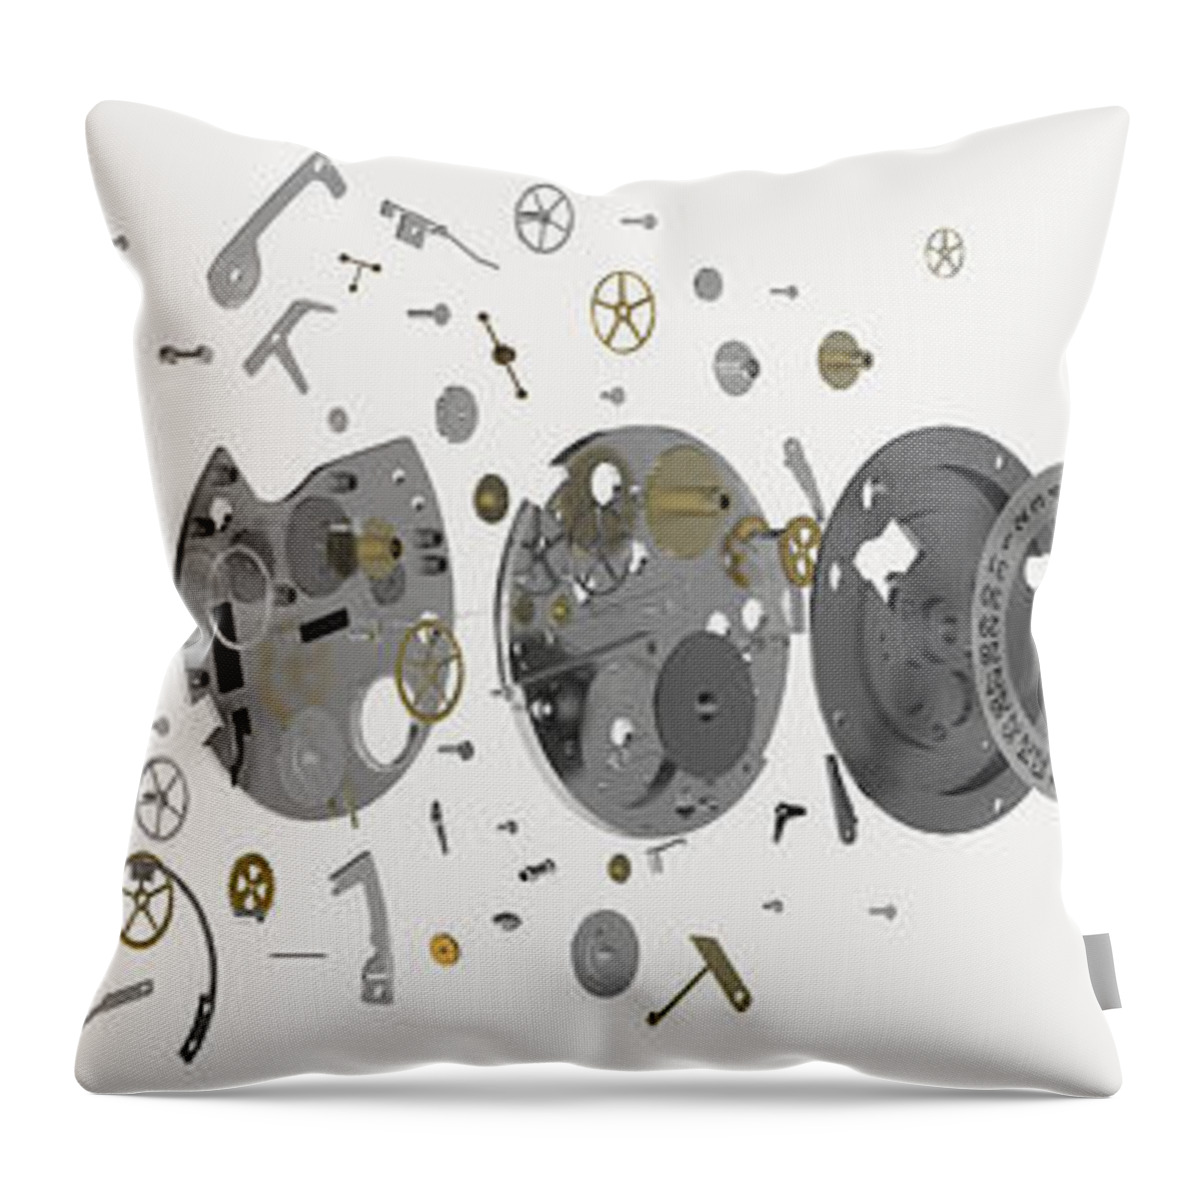 Arrangement Throw Pillow featuring the photograph Wristwatch, Exploded-view Diagram by Nikid Design Ltd / Dorling Kindersley